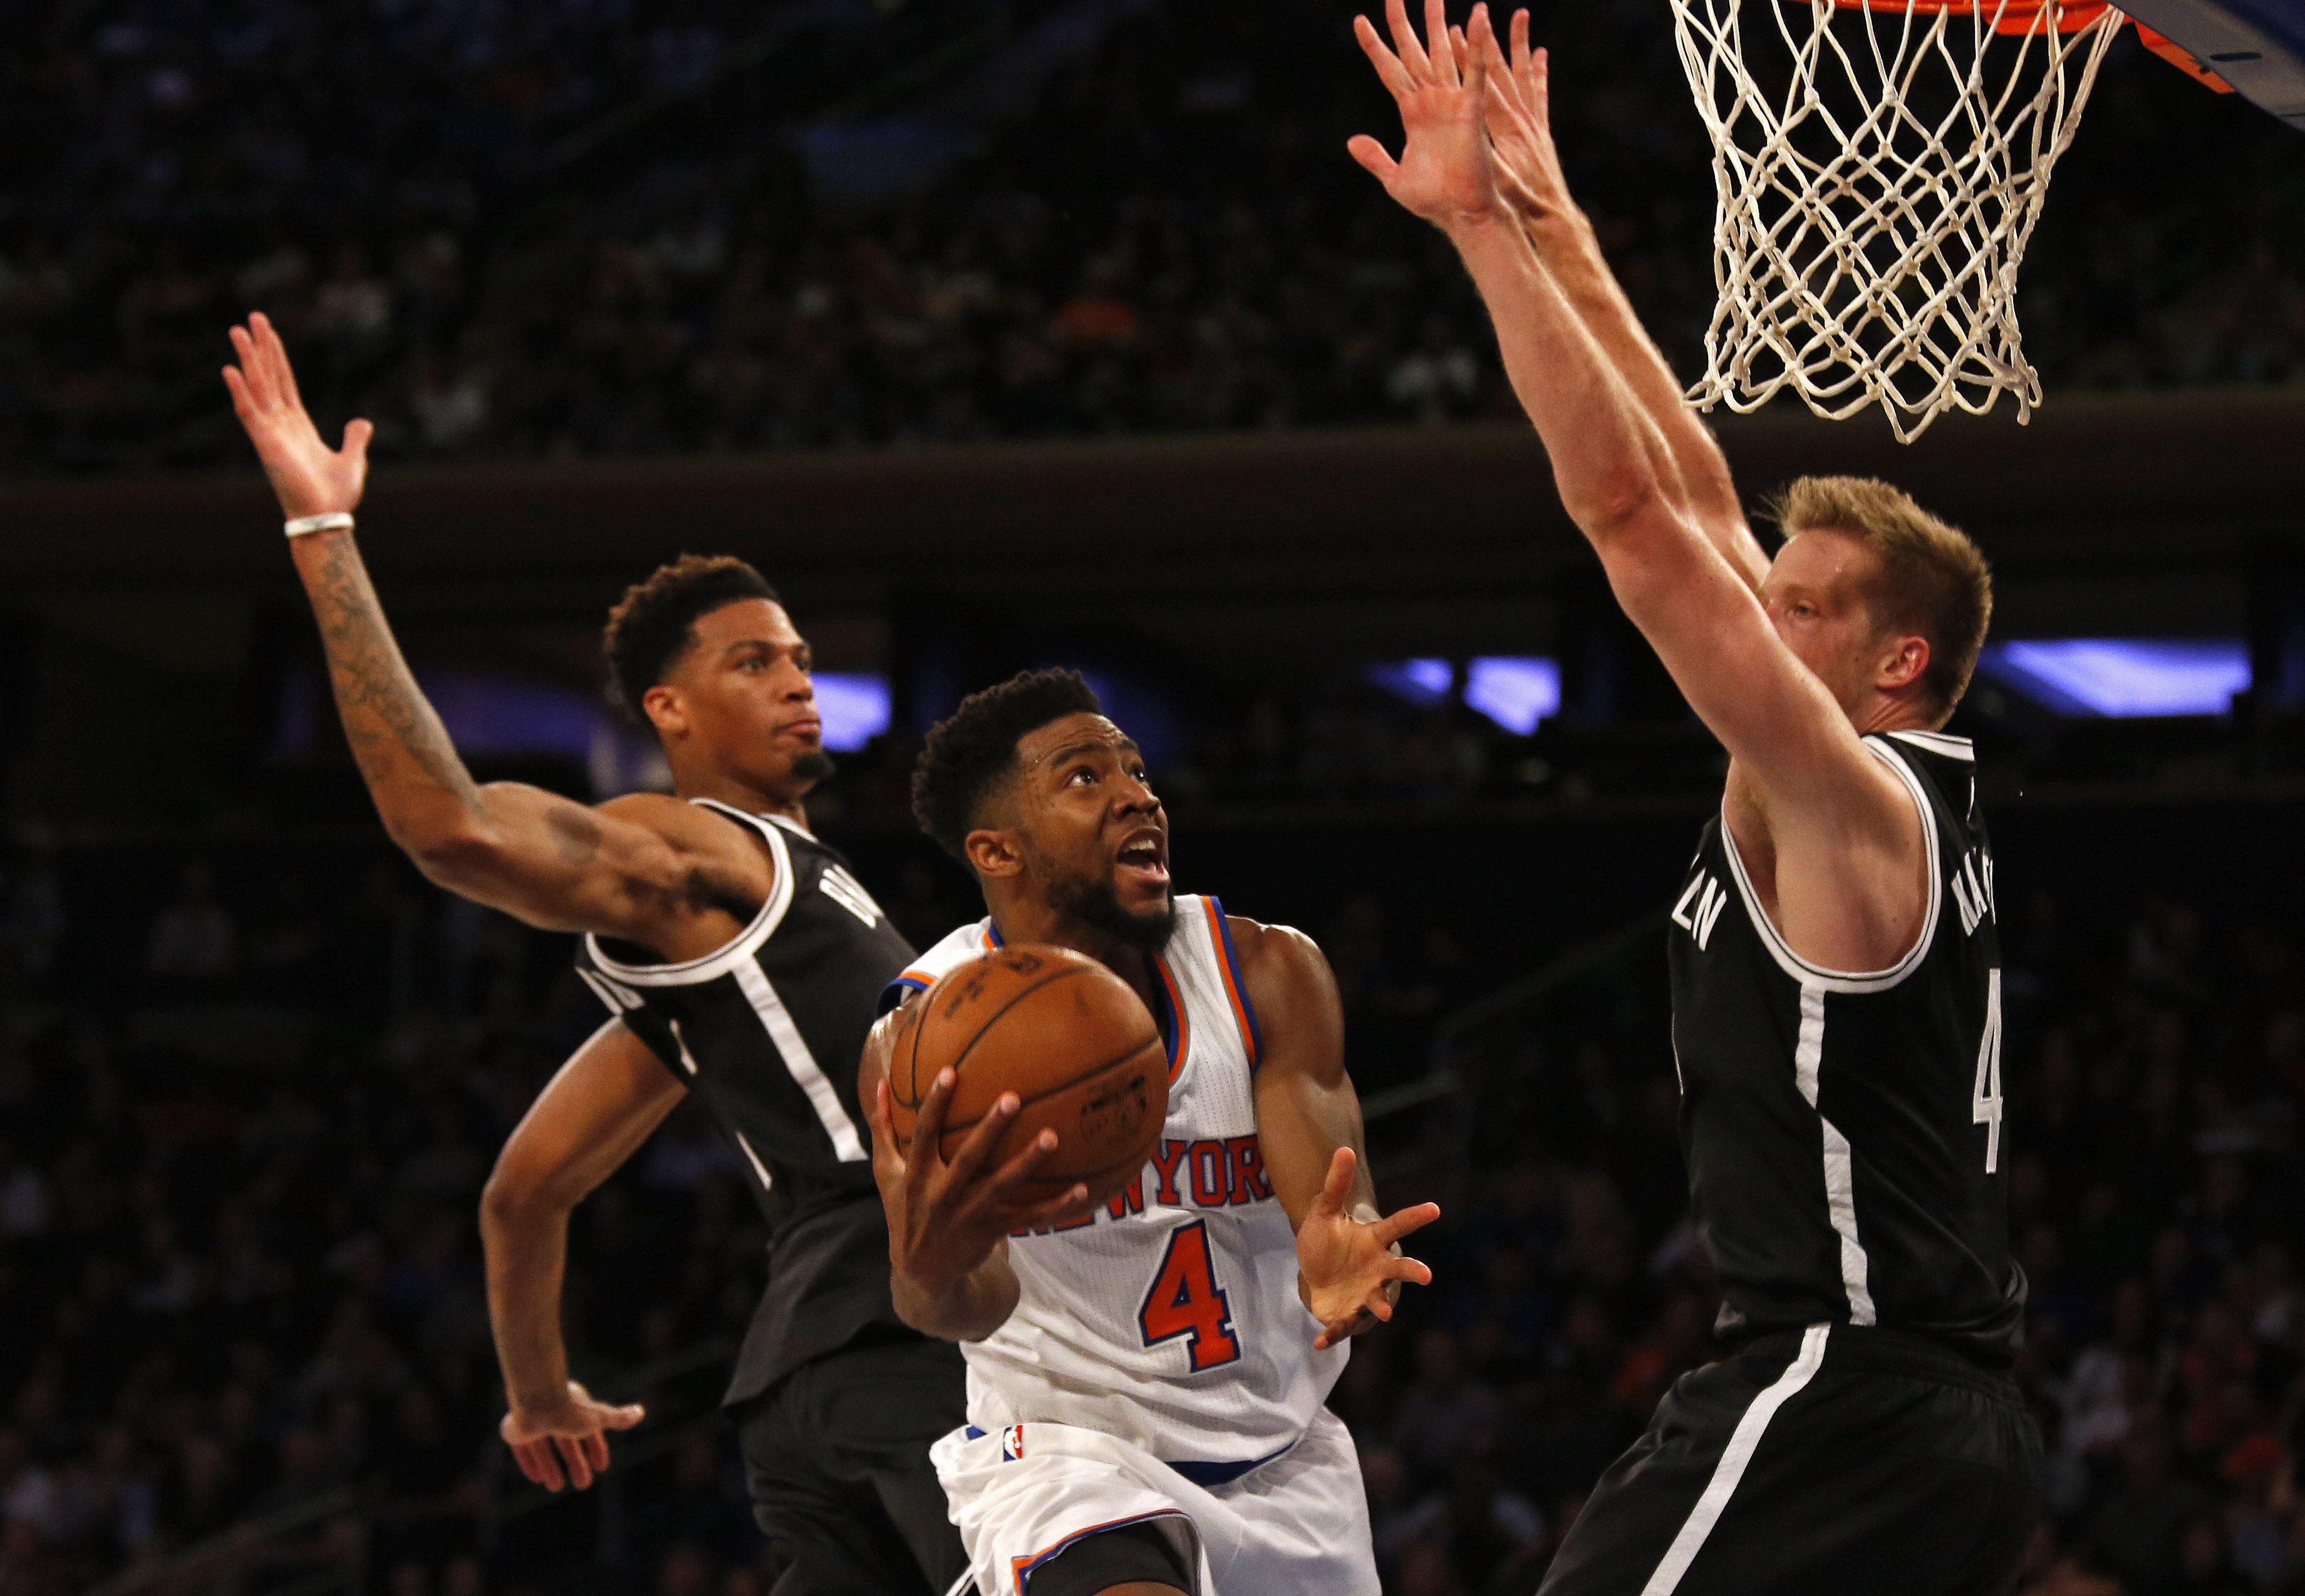 Oct 8, 2016; New York, NY, USA; New York Knicks guard Chasson Randle (4) drives to the net between Brooklyn Nets forward Chris McCullough (1) and Brooklyn Nets forward Justin Hamilton (41) during the first half at Madison Square Garden. Mandatory Credit: Adam Hunger-USA TODAY Sports